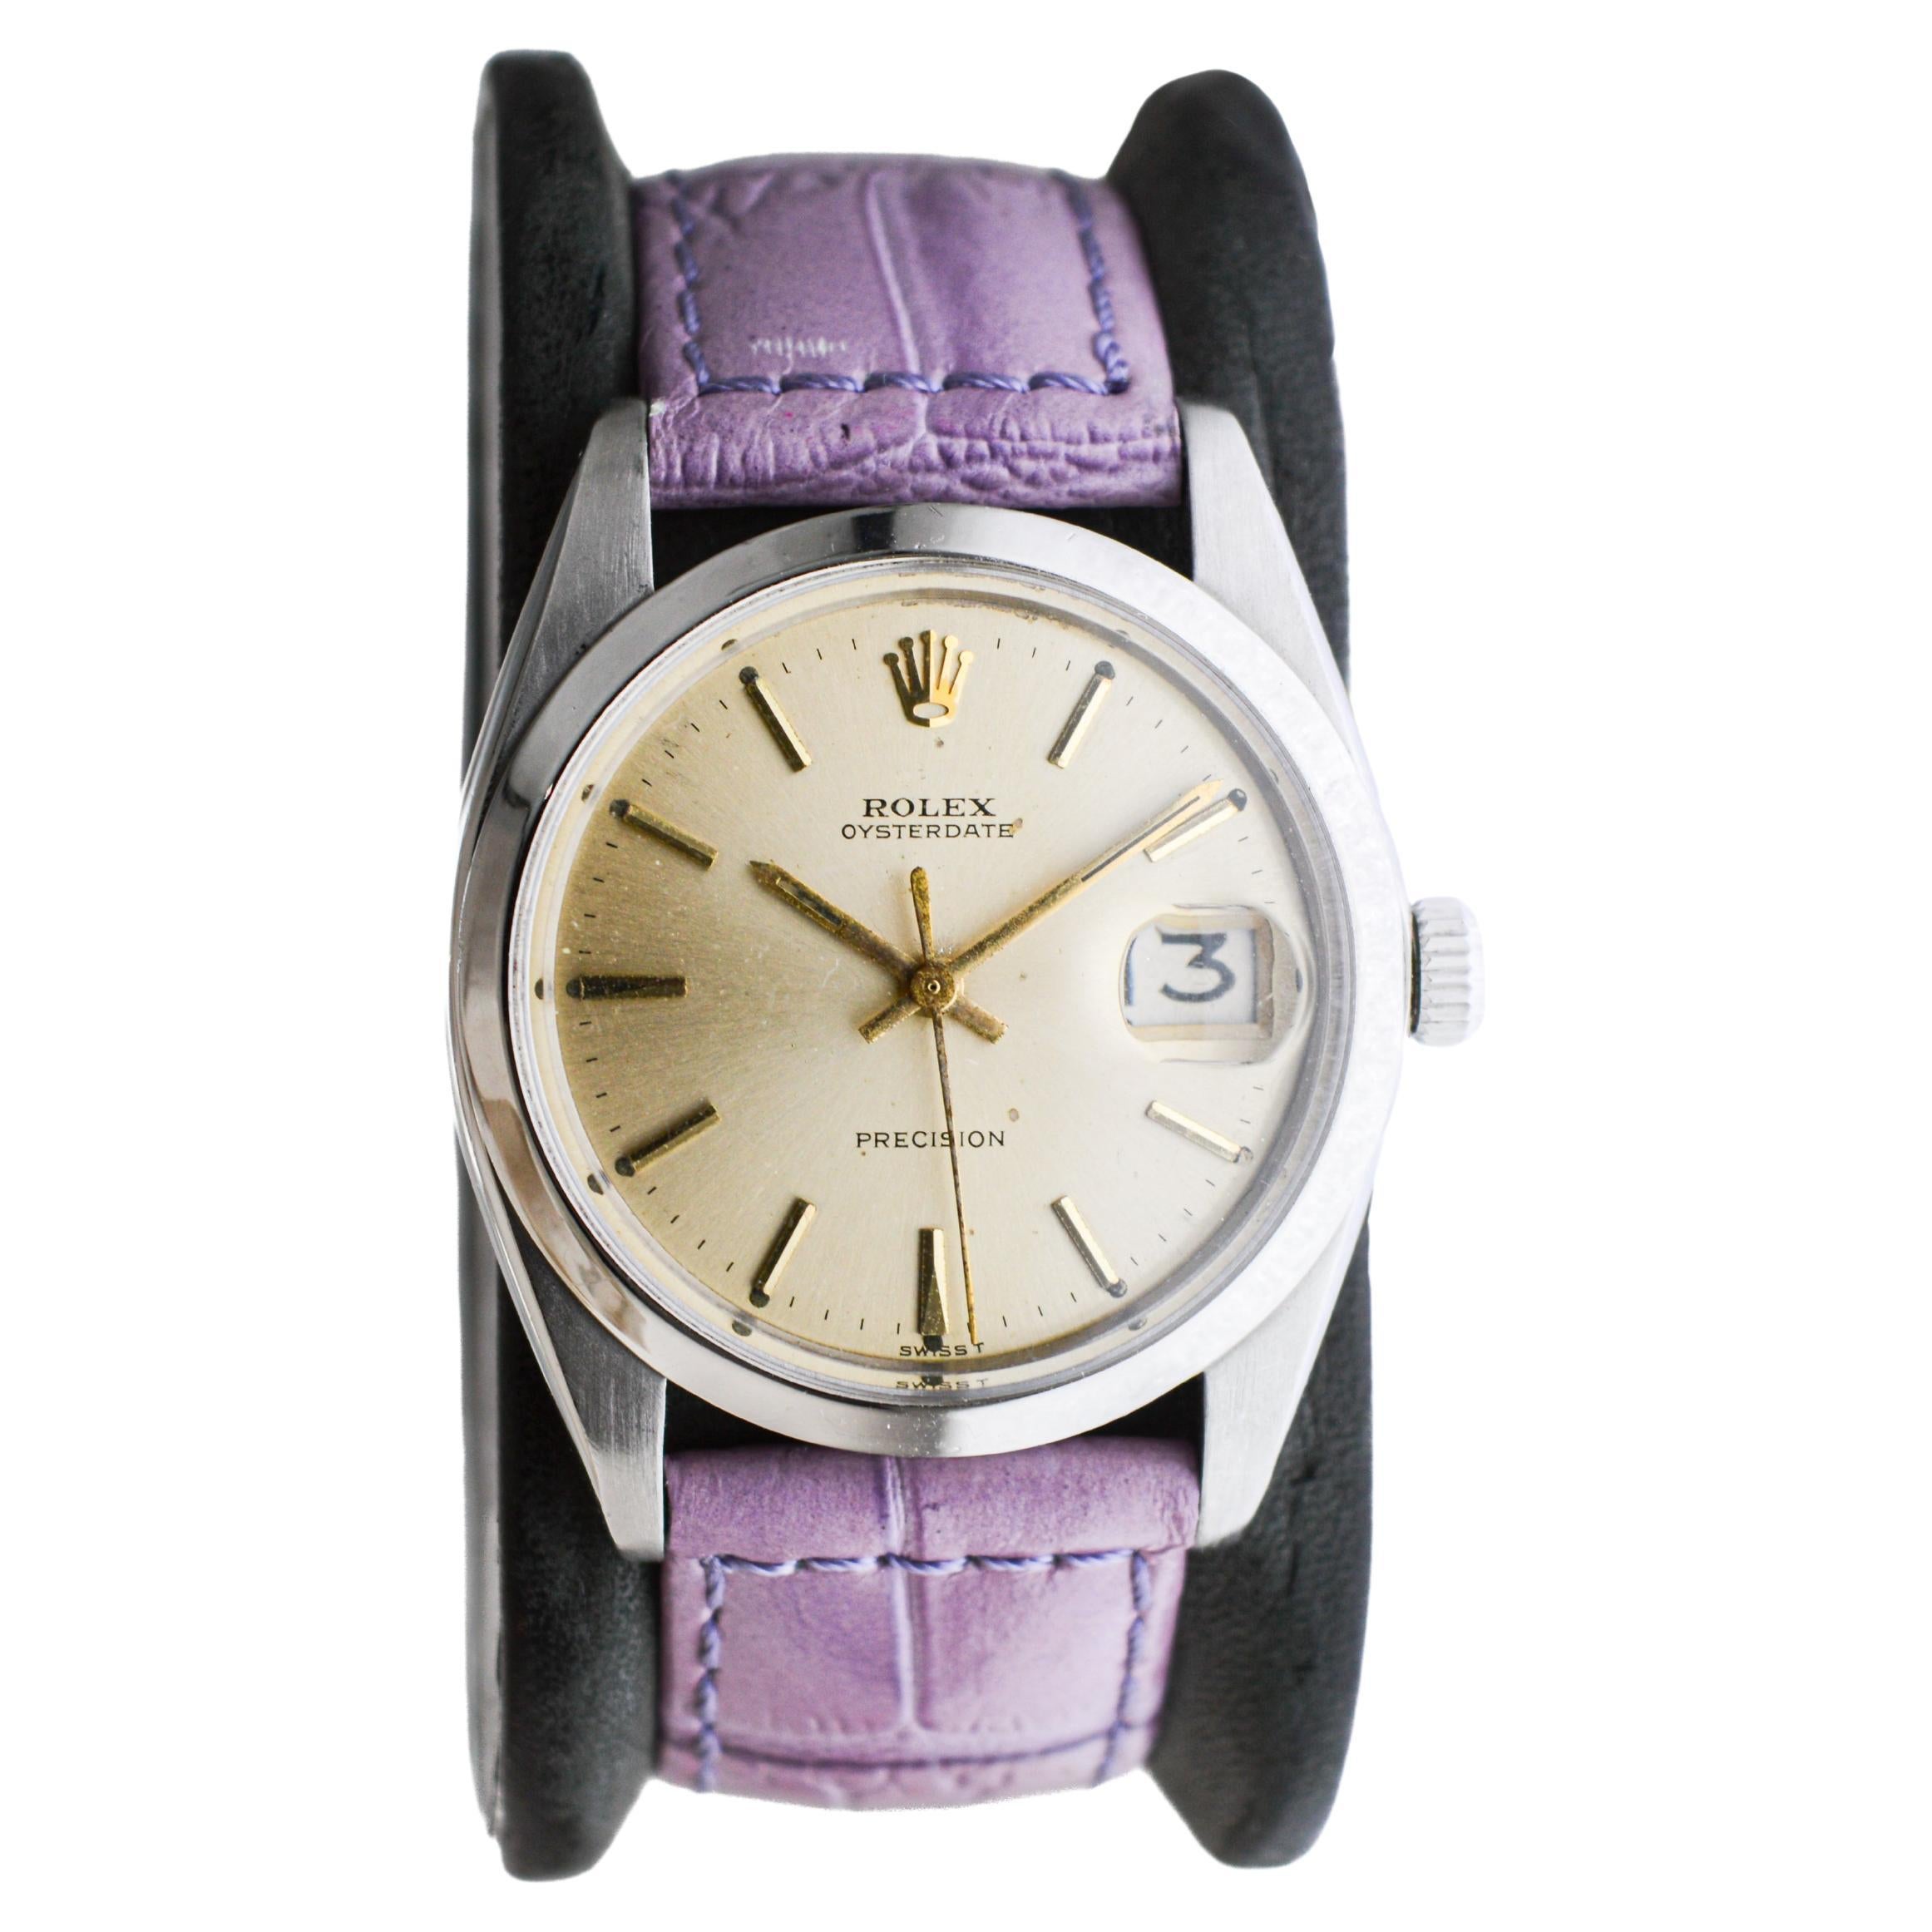 FACTORY / HOUSE: Rolex Watch Company
STYLE / REFERENCE: Oysterdate / Reference 6694
METAL / MATERIAL: Stainless Steel
CIRCA / YEAR: 1960's
DIMENSIONS / SIZE: Length 42mm X Diameter 35mm
MOVEMENT / CALIBER: Manual Winding / 17 Jewels / Caliber